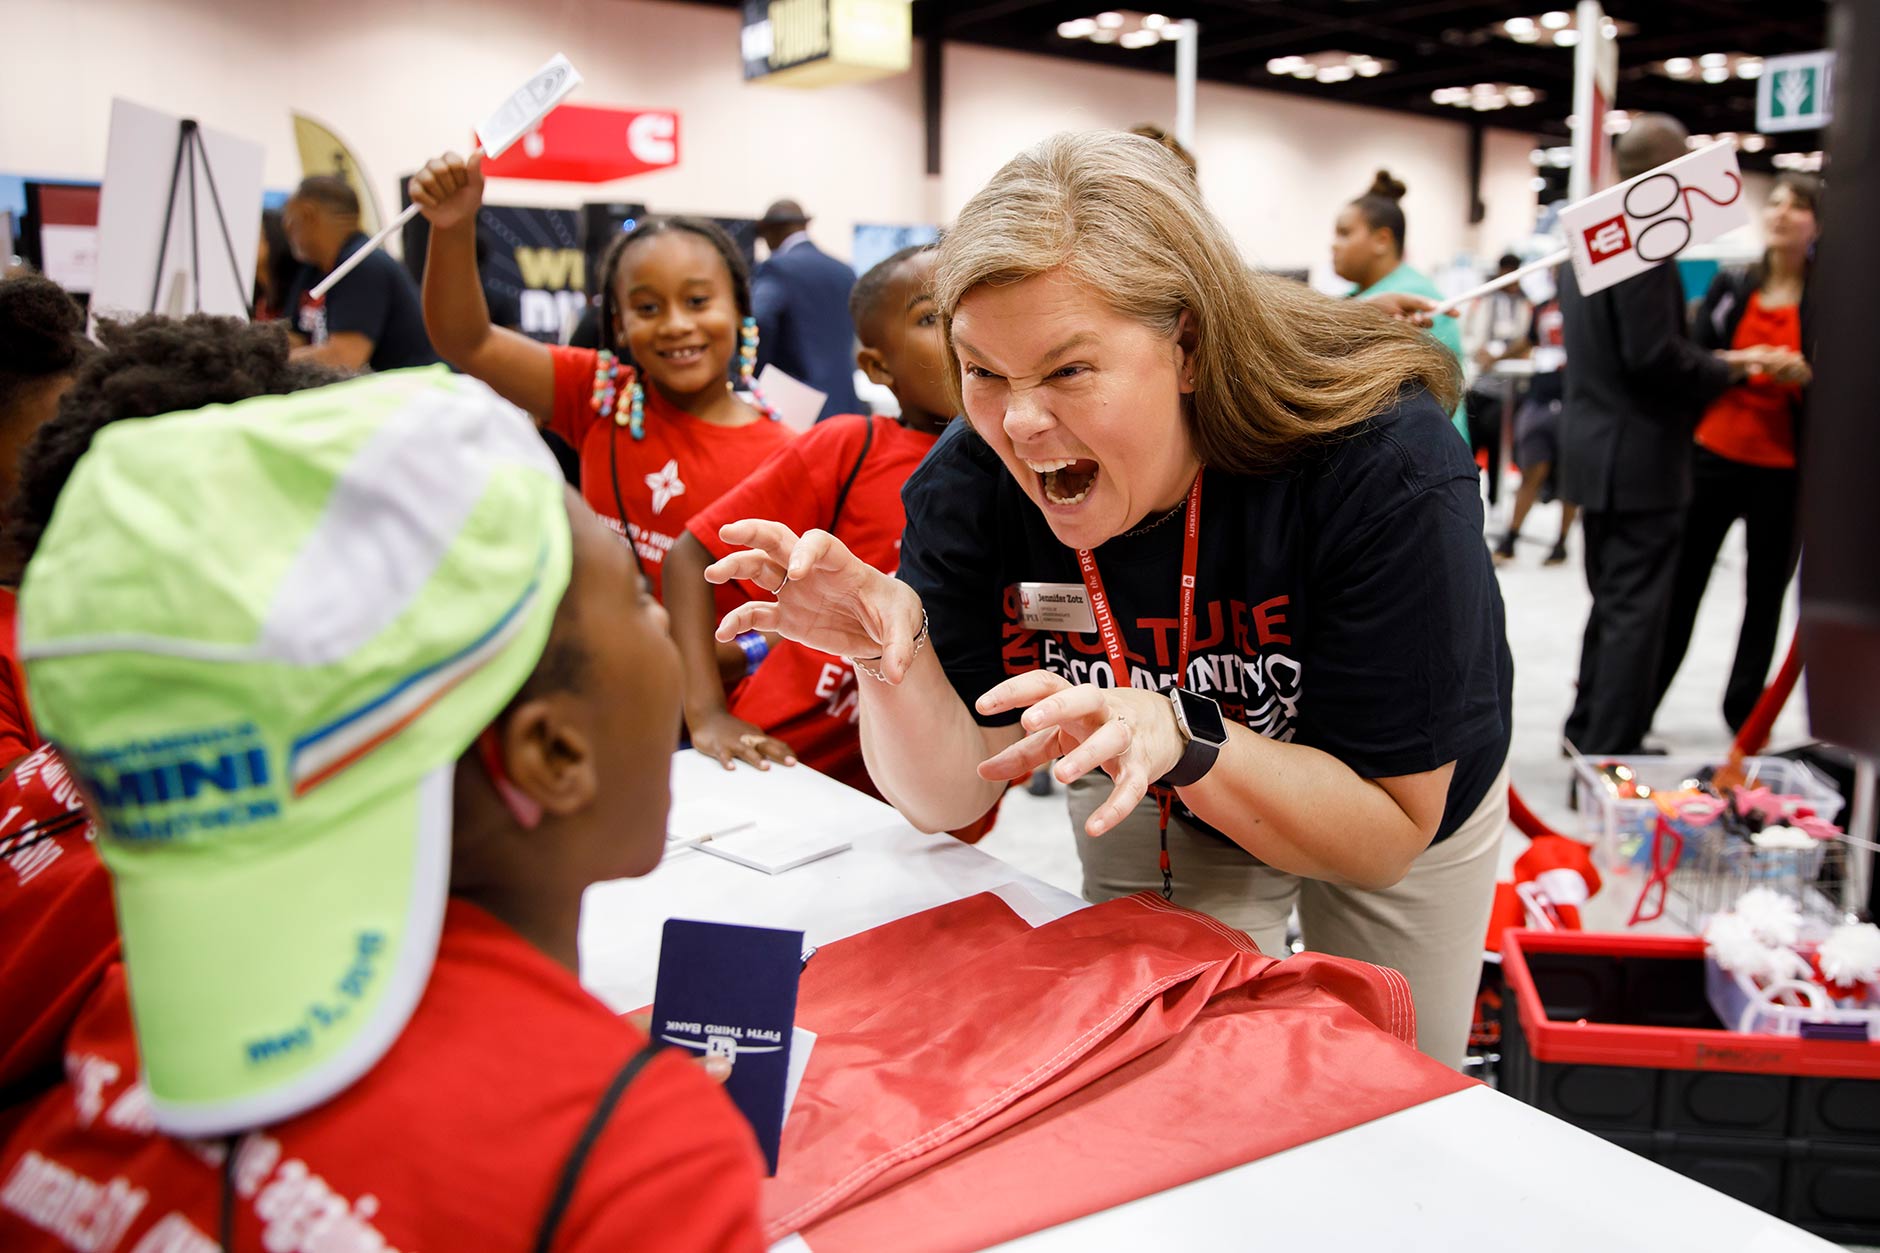 IUPUI Undergraduate Admissions Senior Coordinator Jennifer Zotz gives an IUPUI Jaguar roar to a youngster at the IU booth during Indiana Black Expo's 48th Summer Celebration in Indianapolis on Friday, July 20, 2018. (James Brosher/IU Communications)